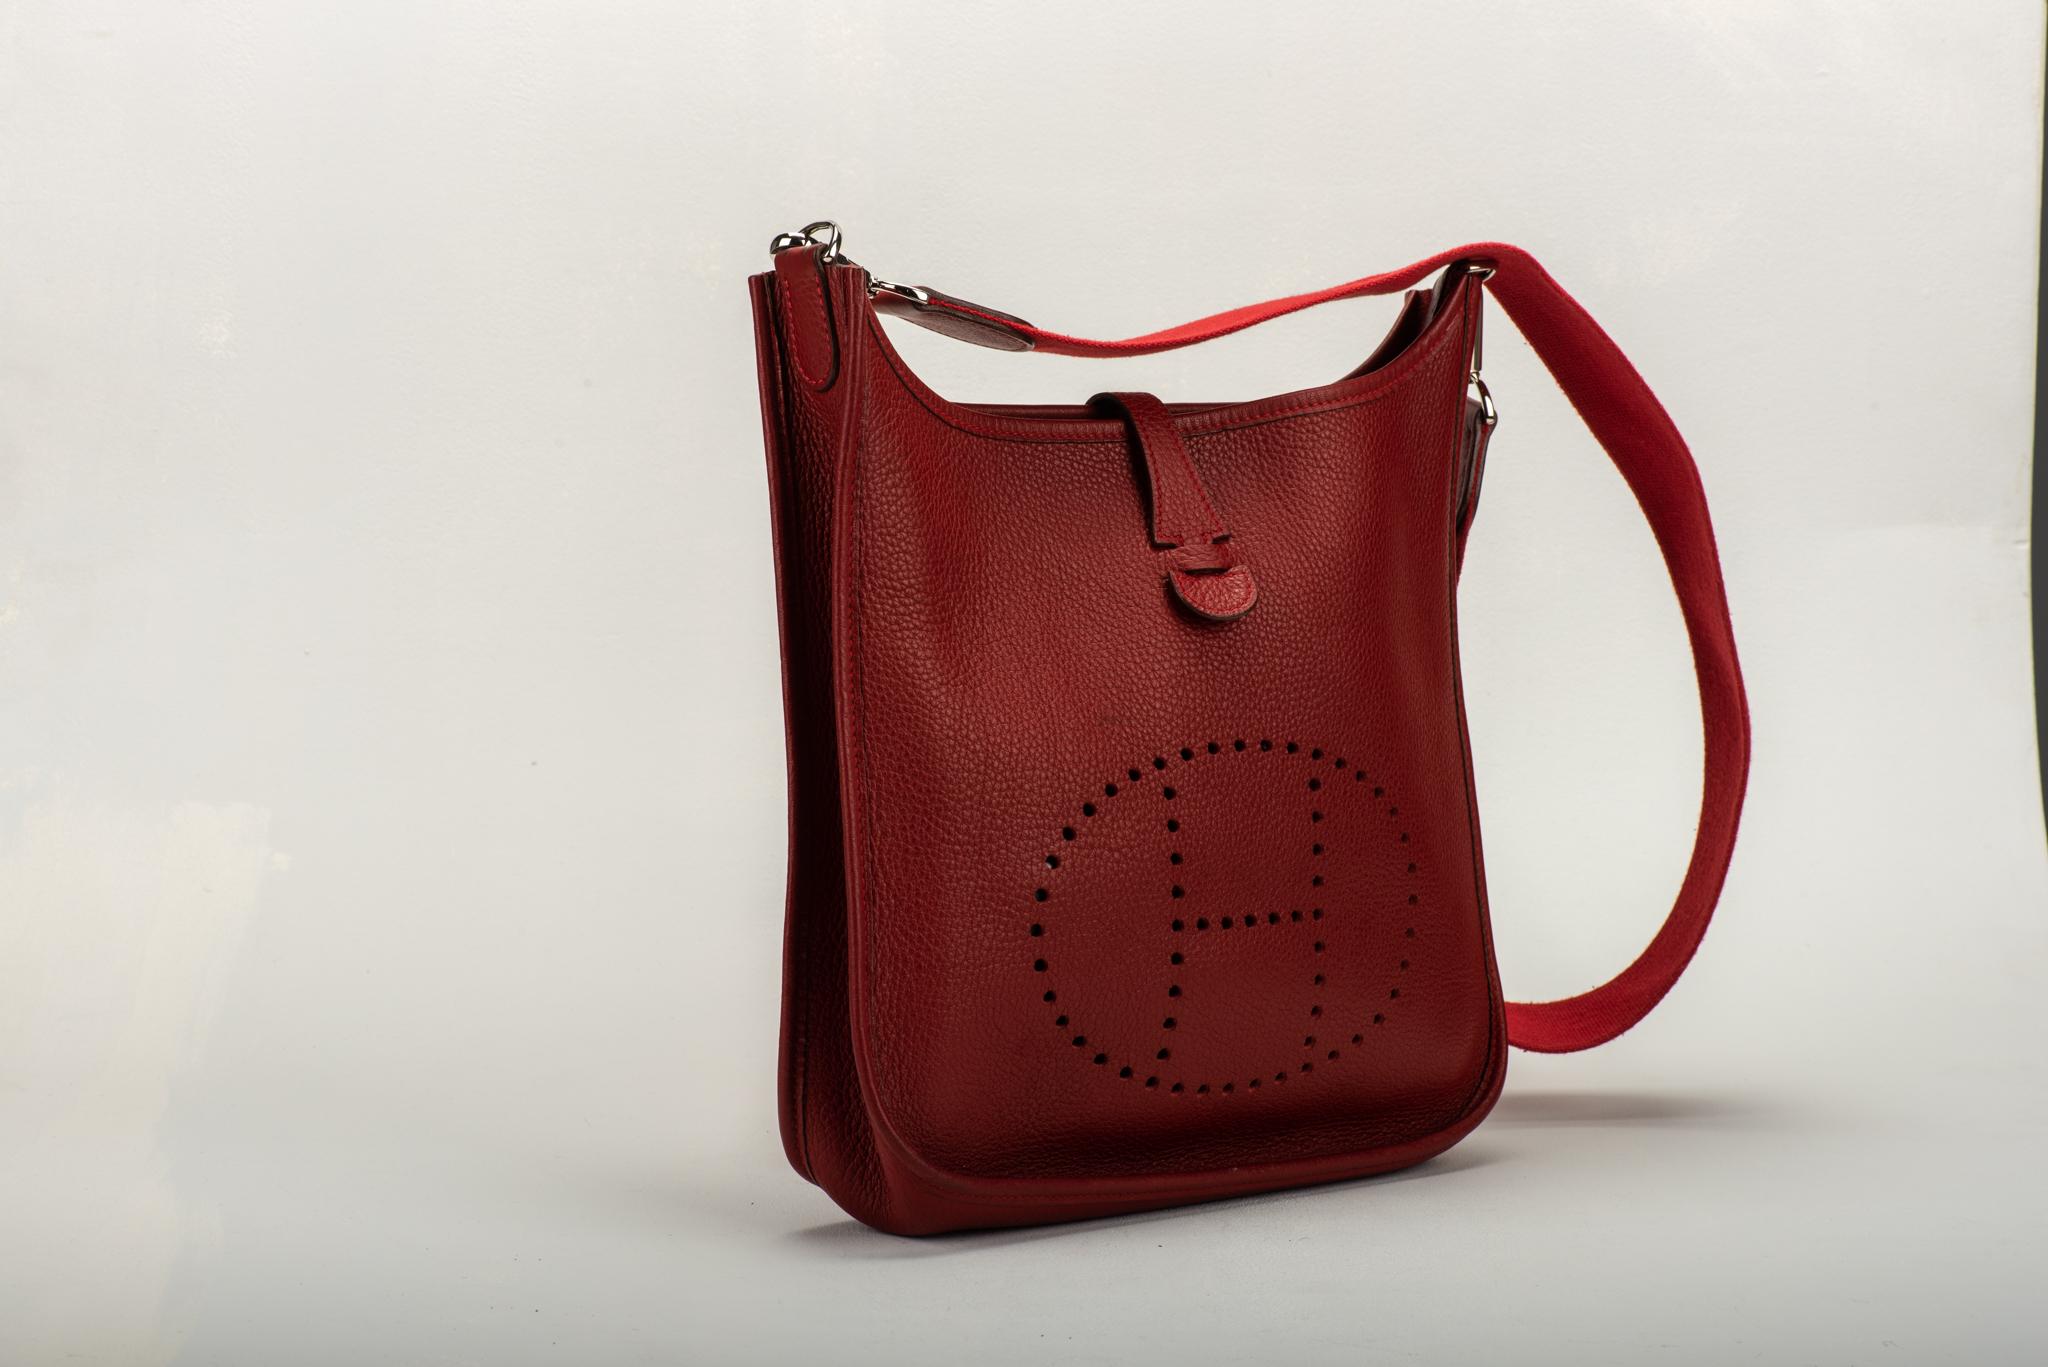 Hermès preowned Evelyne PM in red Clemence leather with palladium hardware. Date stamp J for 2006. Comes with original dust cover. Please refer to photos for condition. Minor wear.
